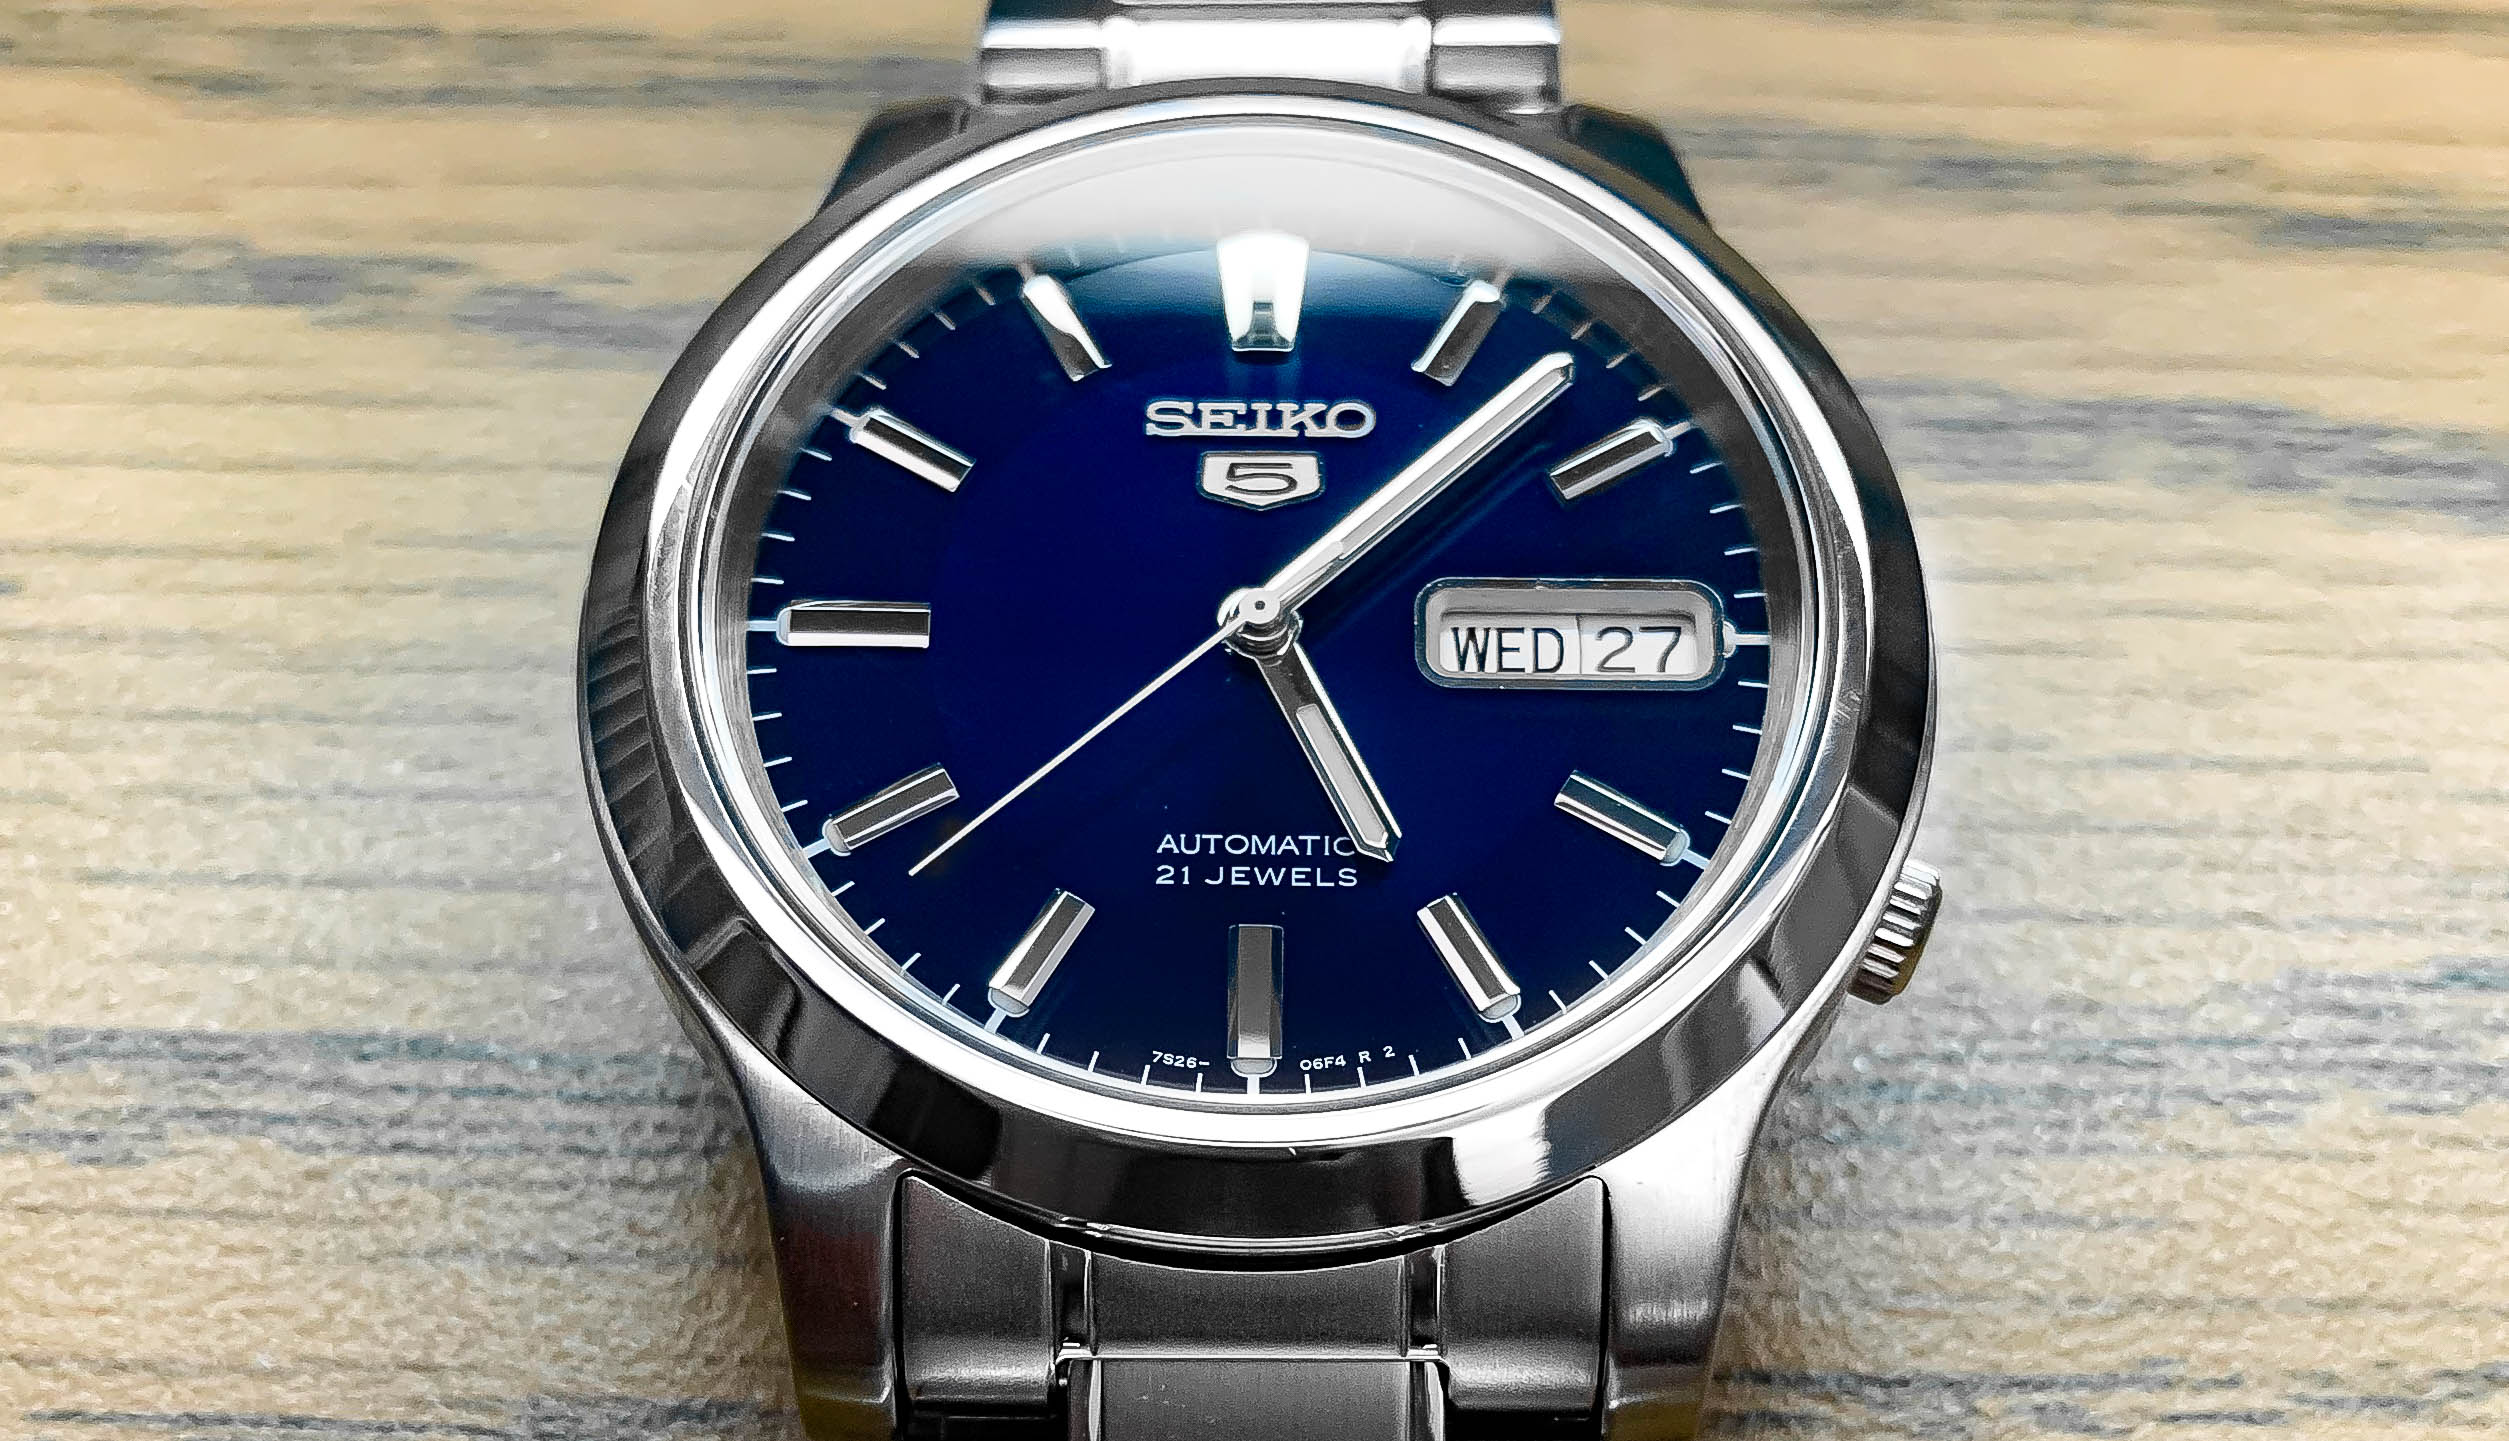 Seiko model number snk793 fit band - hoolikick